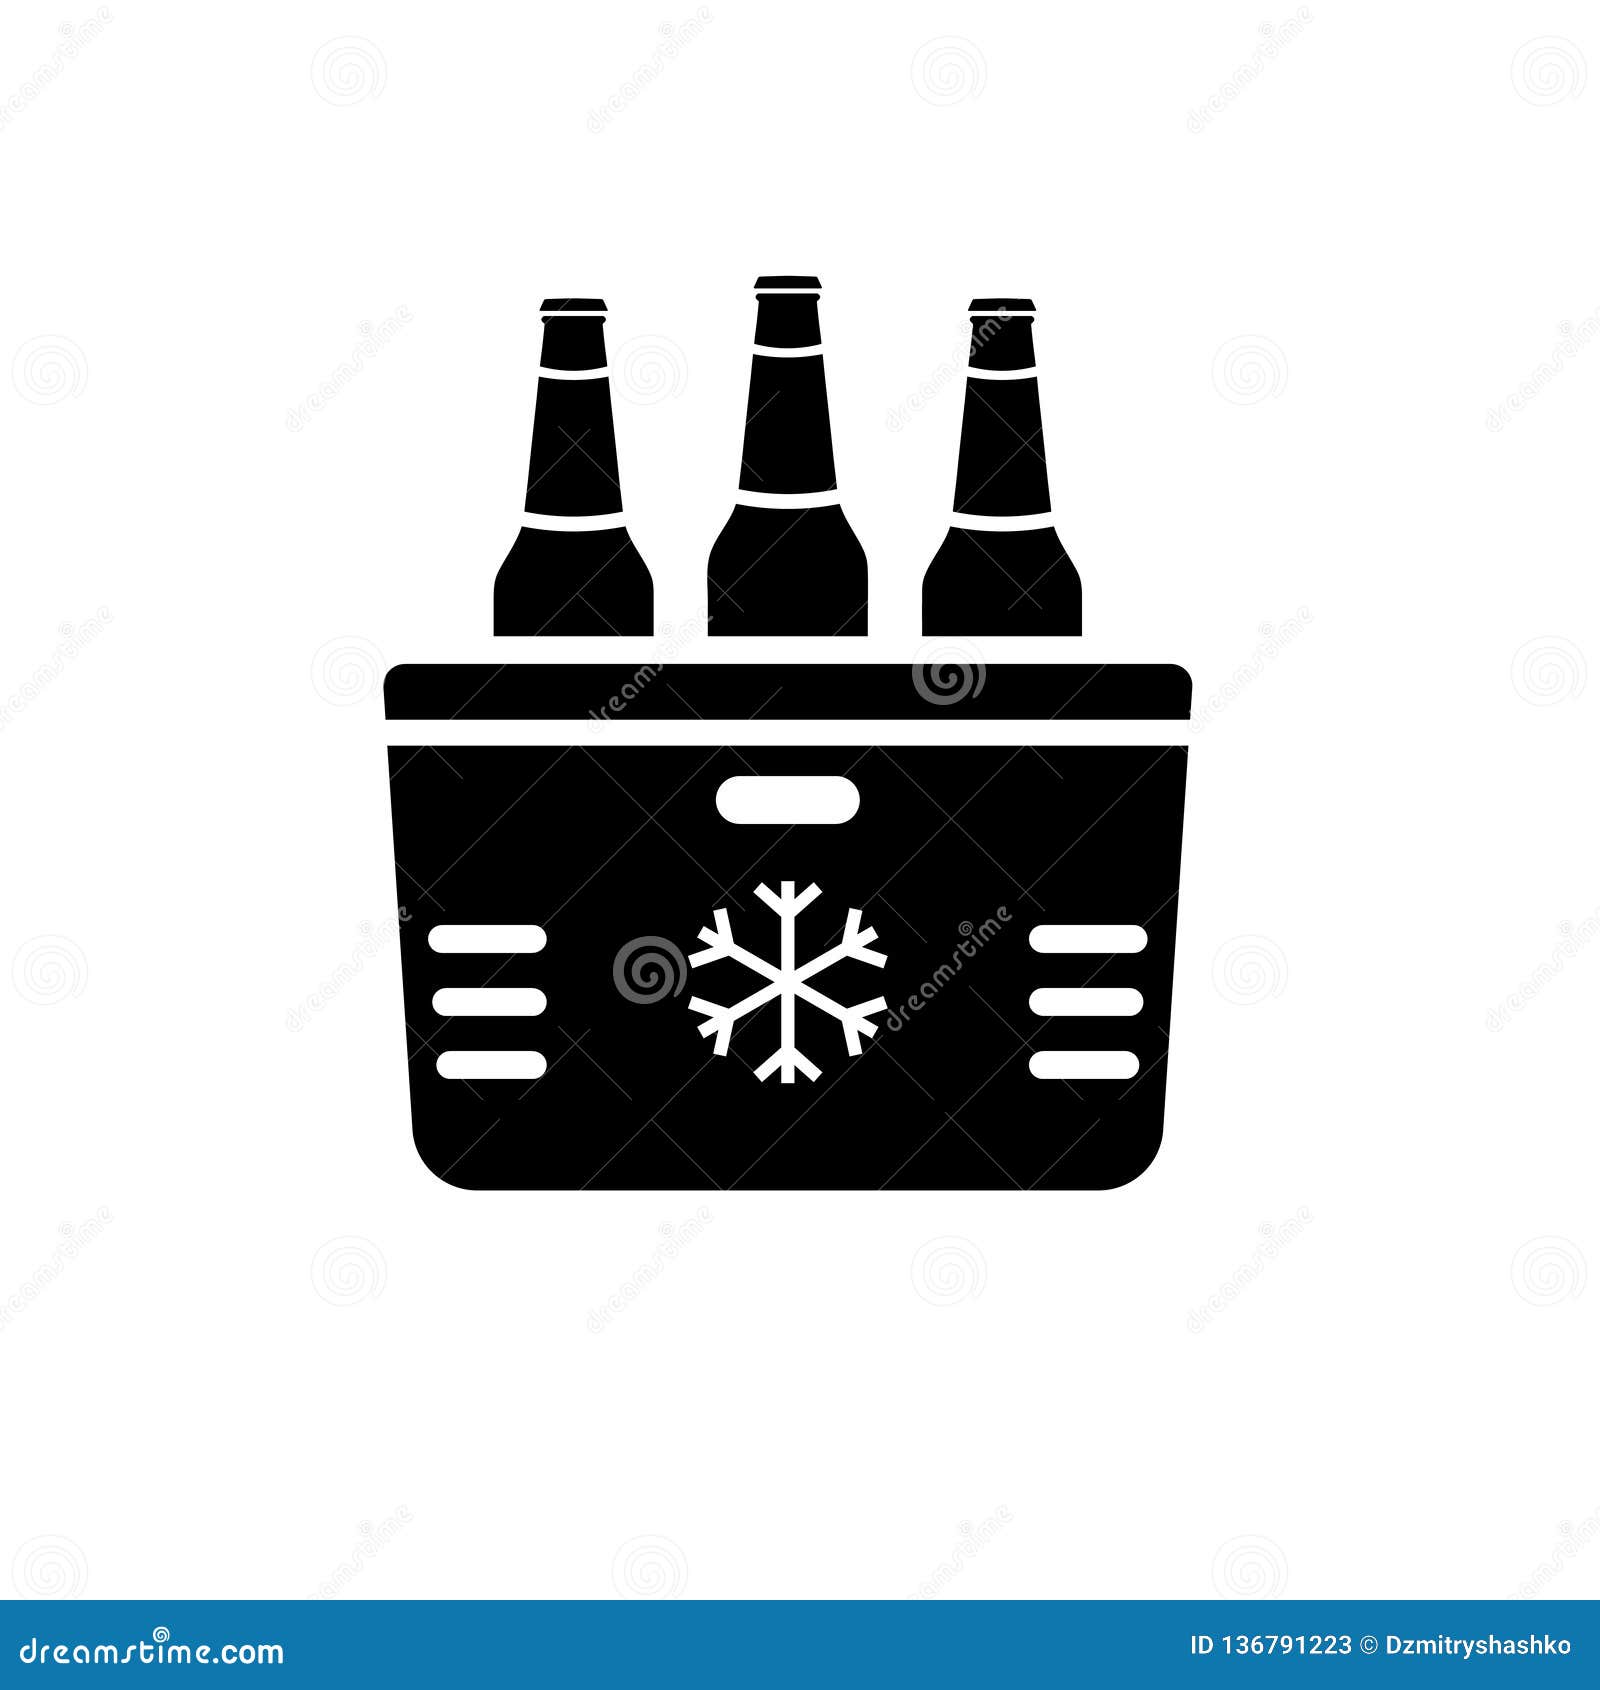 beach cooler box with beer bottles silhouette icon